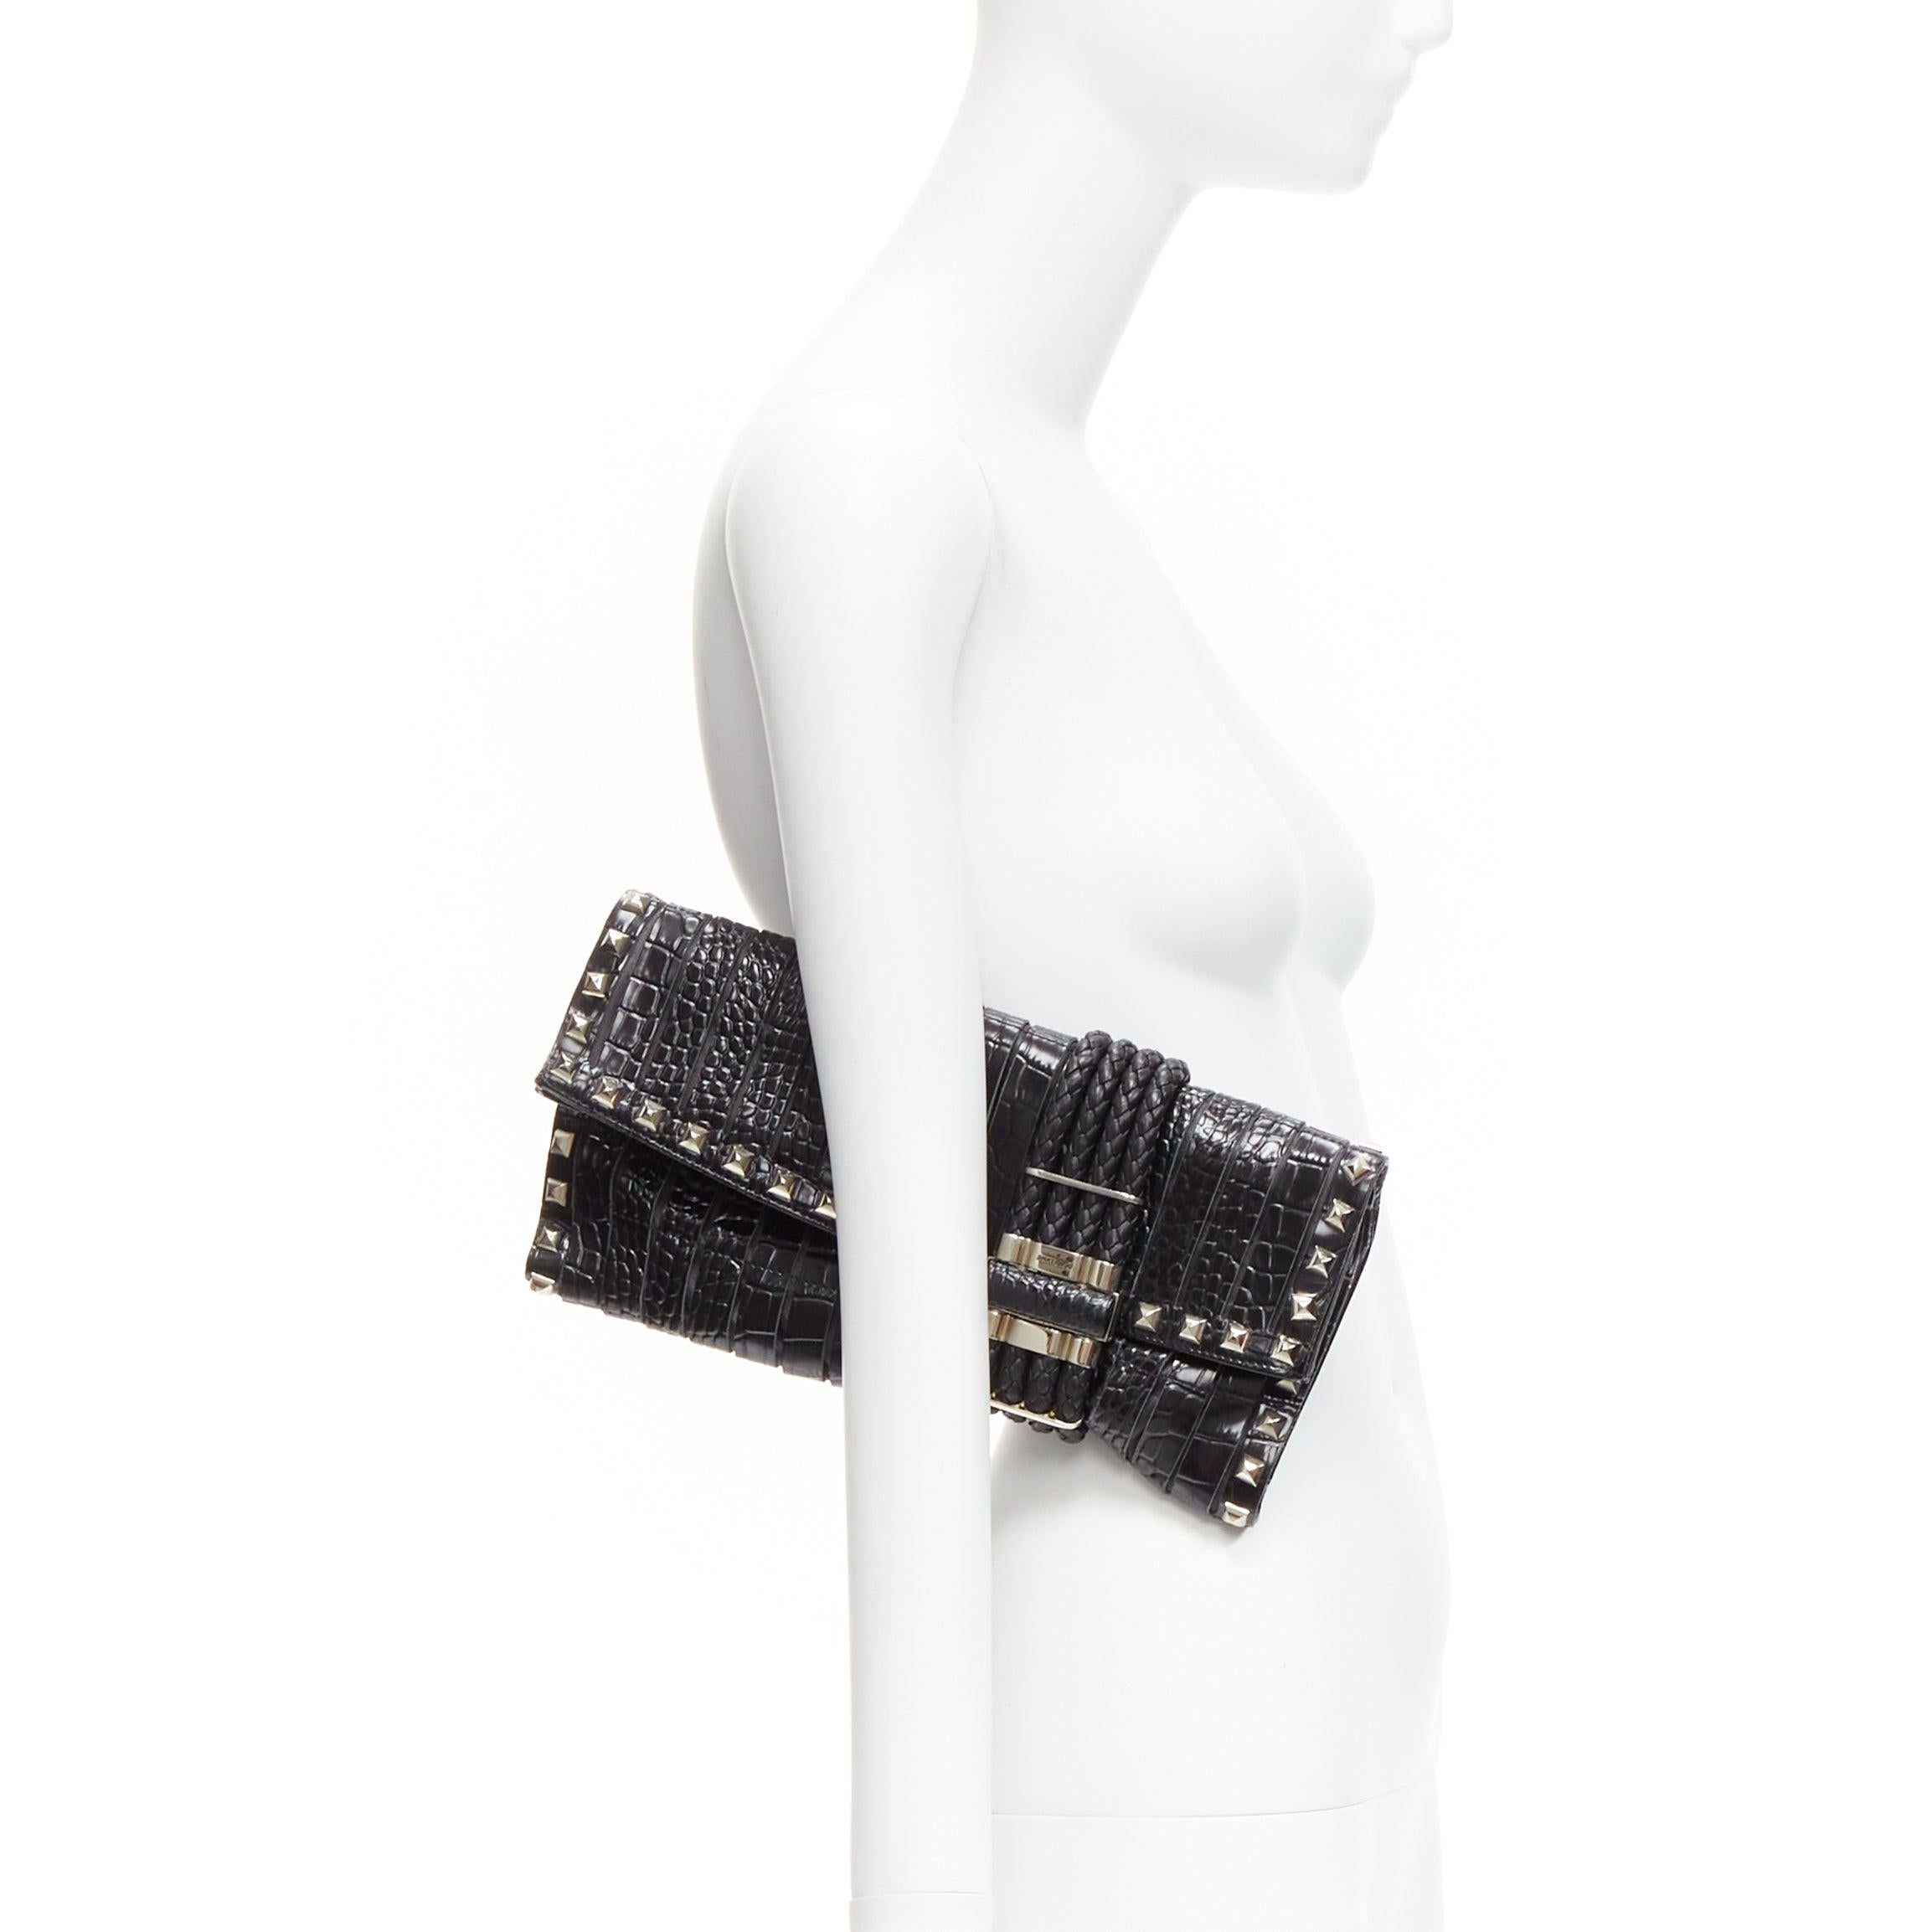 JIMMY CHOO Chandra black croc embossed silver studs woven magnet clasp clutch bag
Reference: GIYG/A00296
Brand: Jimmy Choo
Model: Chandra
Material: Leather, Metal
Color: Black, Silver
Pattern: Animal Print
Closure: Magnet
Lining: Gold Fabric
Extra